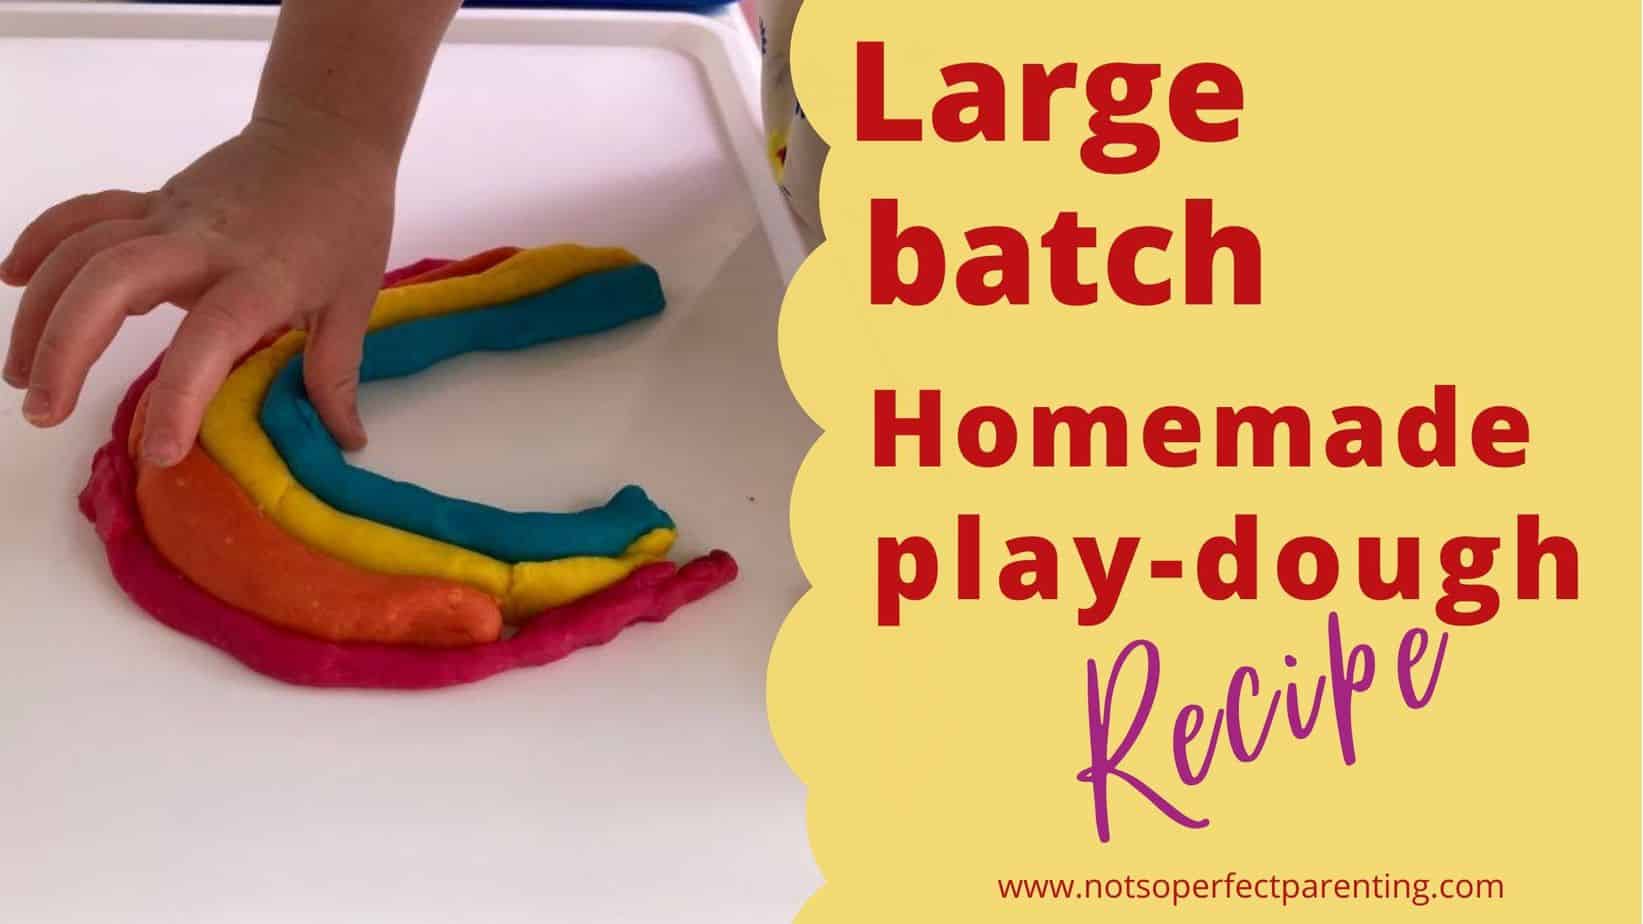 The best recipe for a large batch of homemade play-dough - Not So